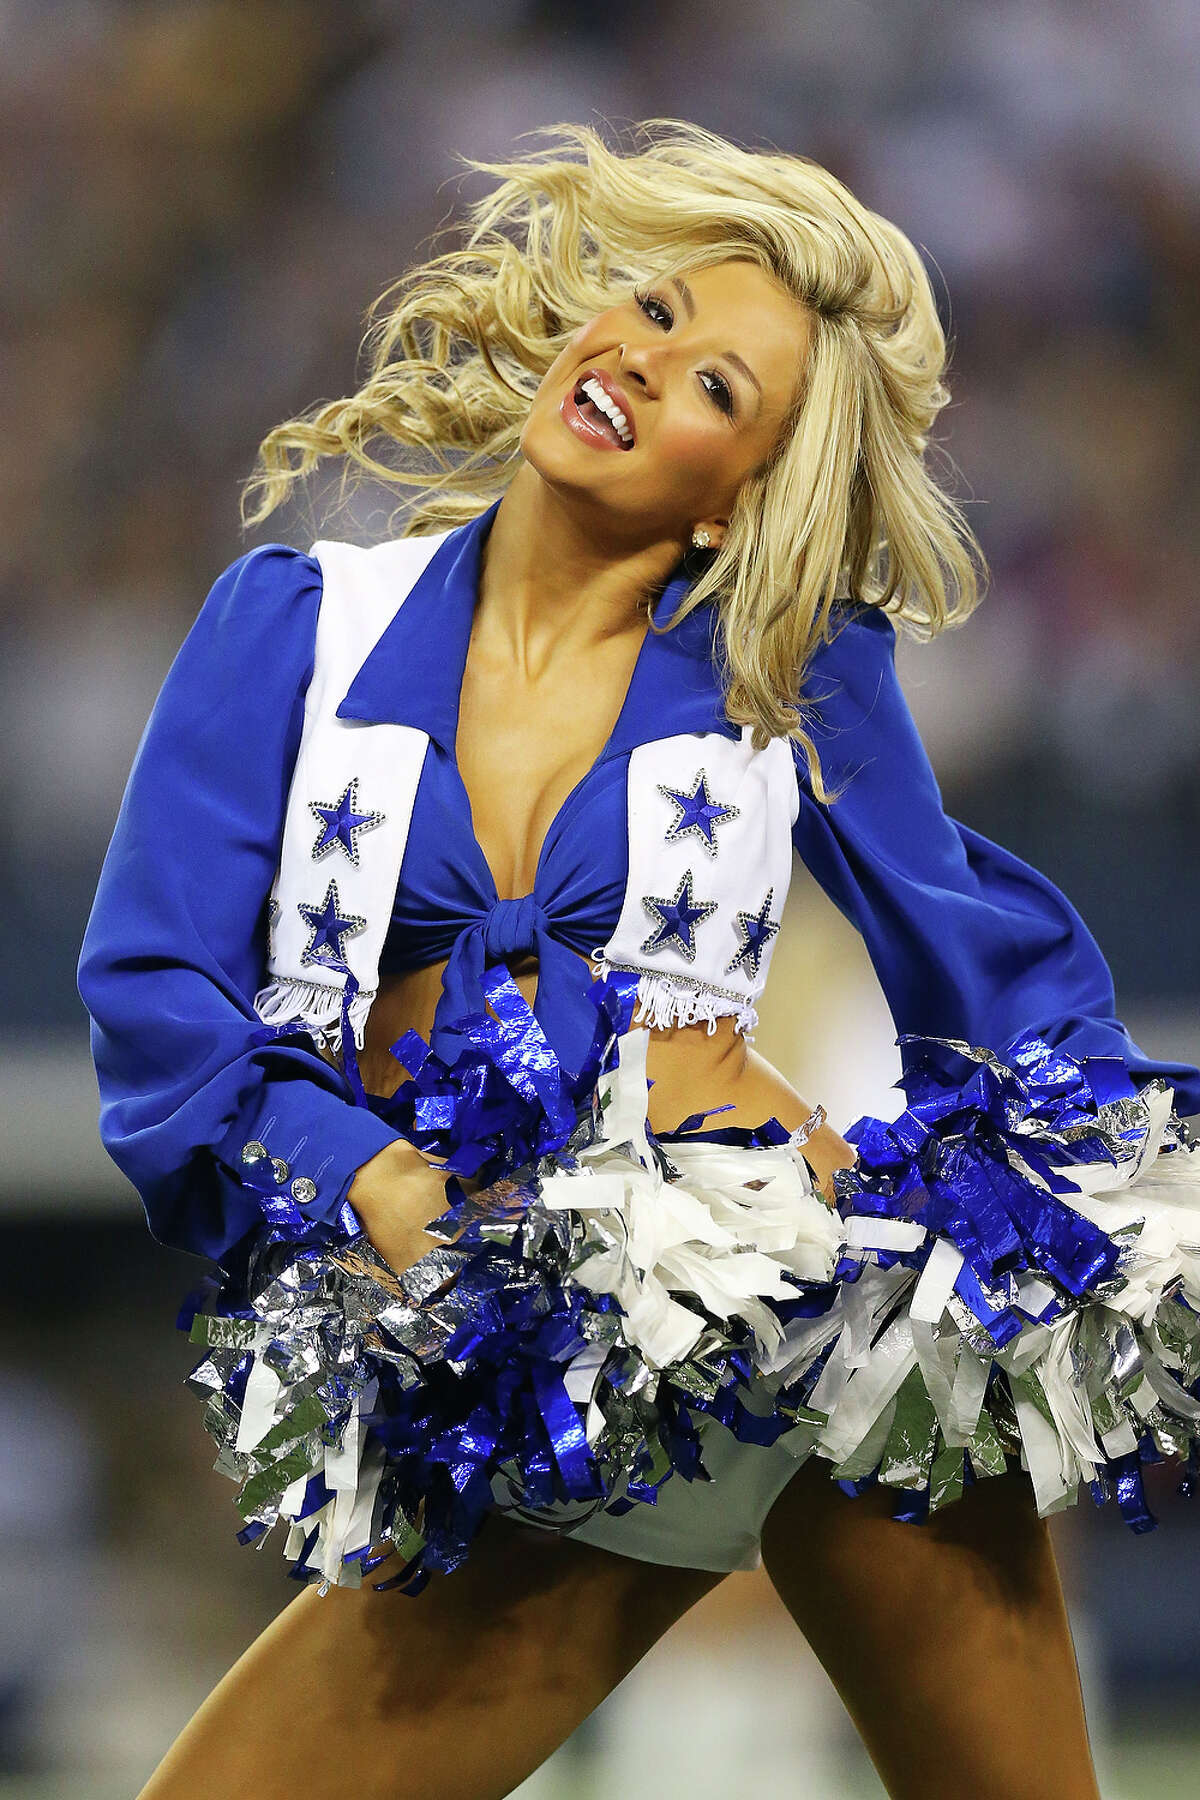 A Dallas Cowboys cheerleader performs during their game against the Philadelphia Eagles at Cowboys Stadium on December 29, 2013 in Arlington, Texas.